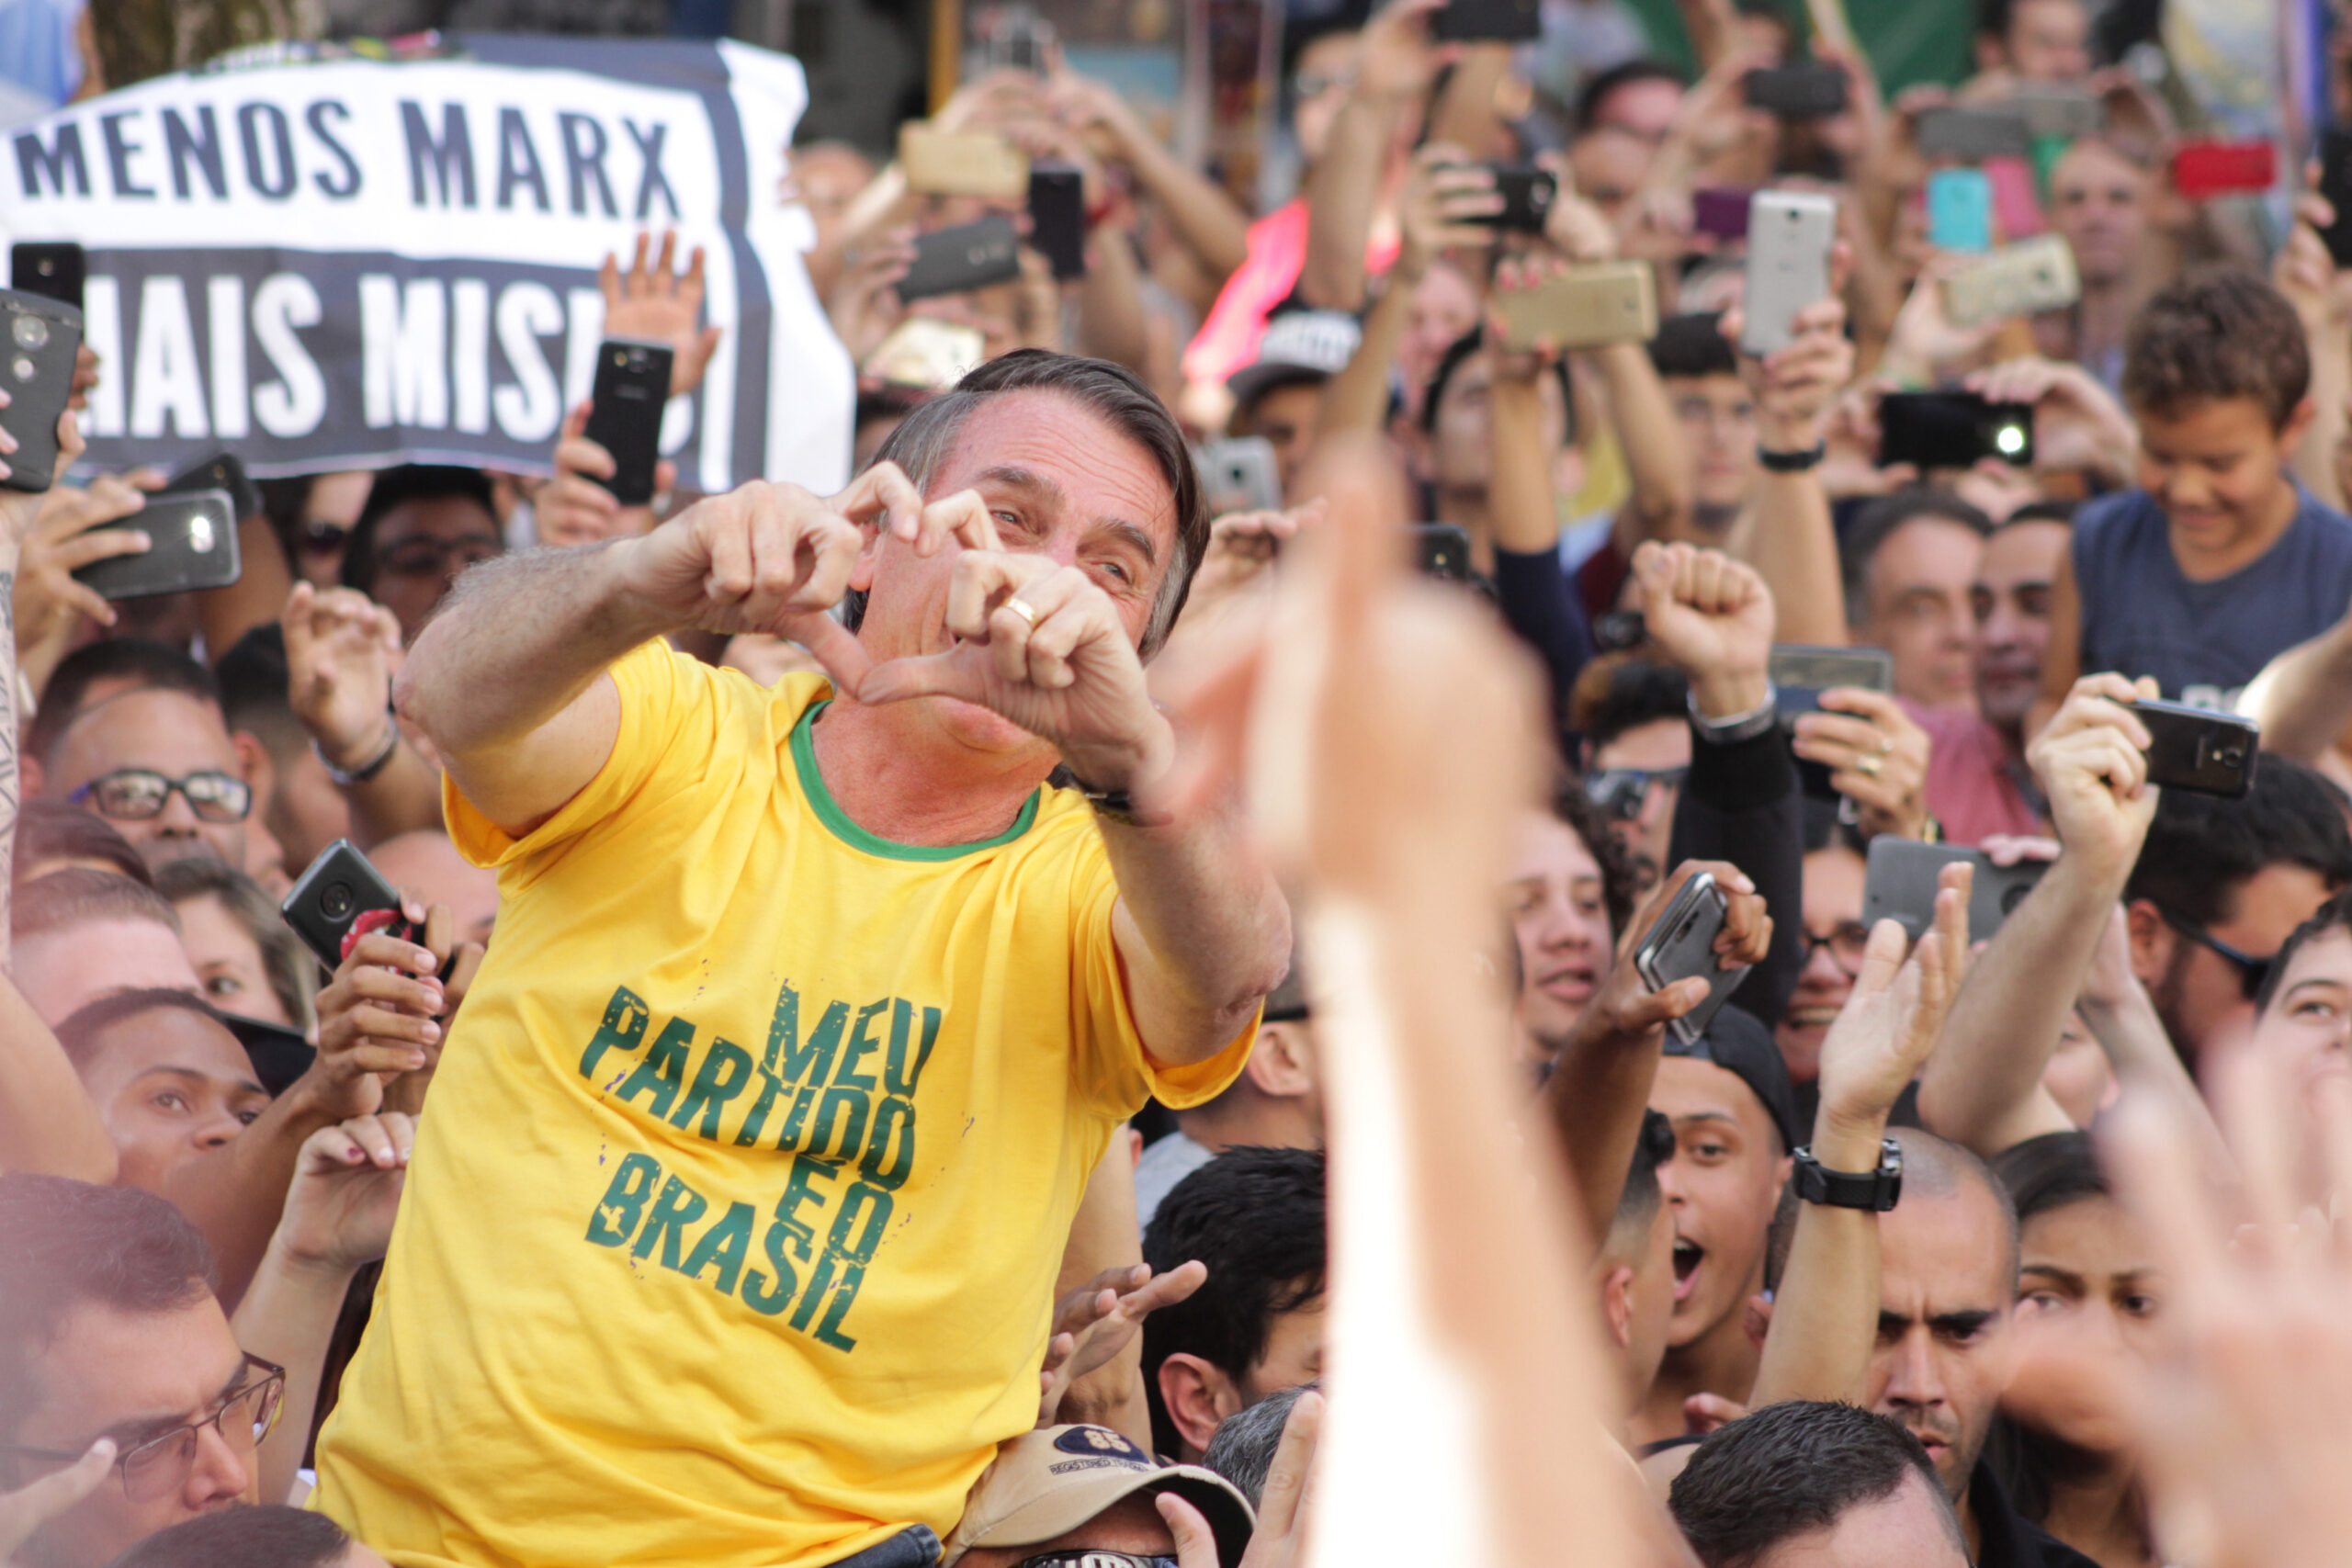 man who stabbed bolsonaro was a lone wolf, feds reaffirm